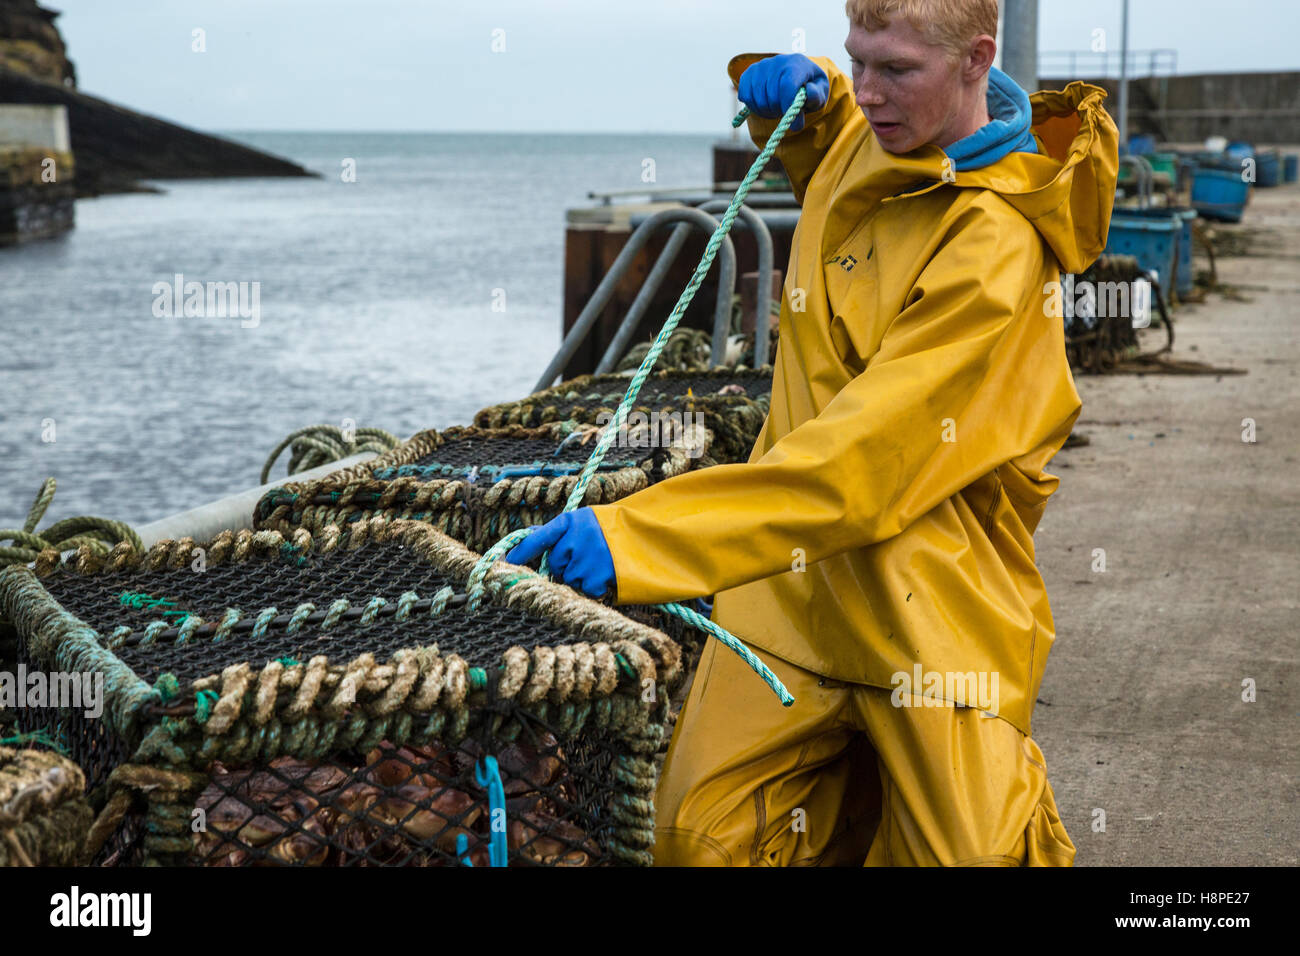 A young fisherman ties a basket containing freshly caught crabs Stock Photo